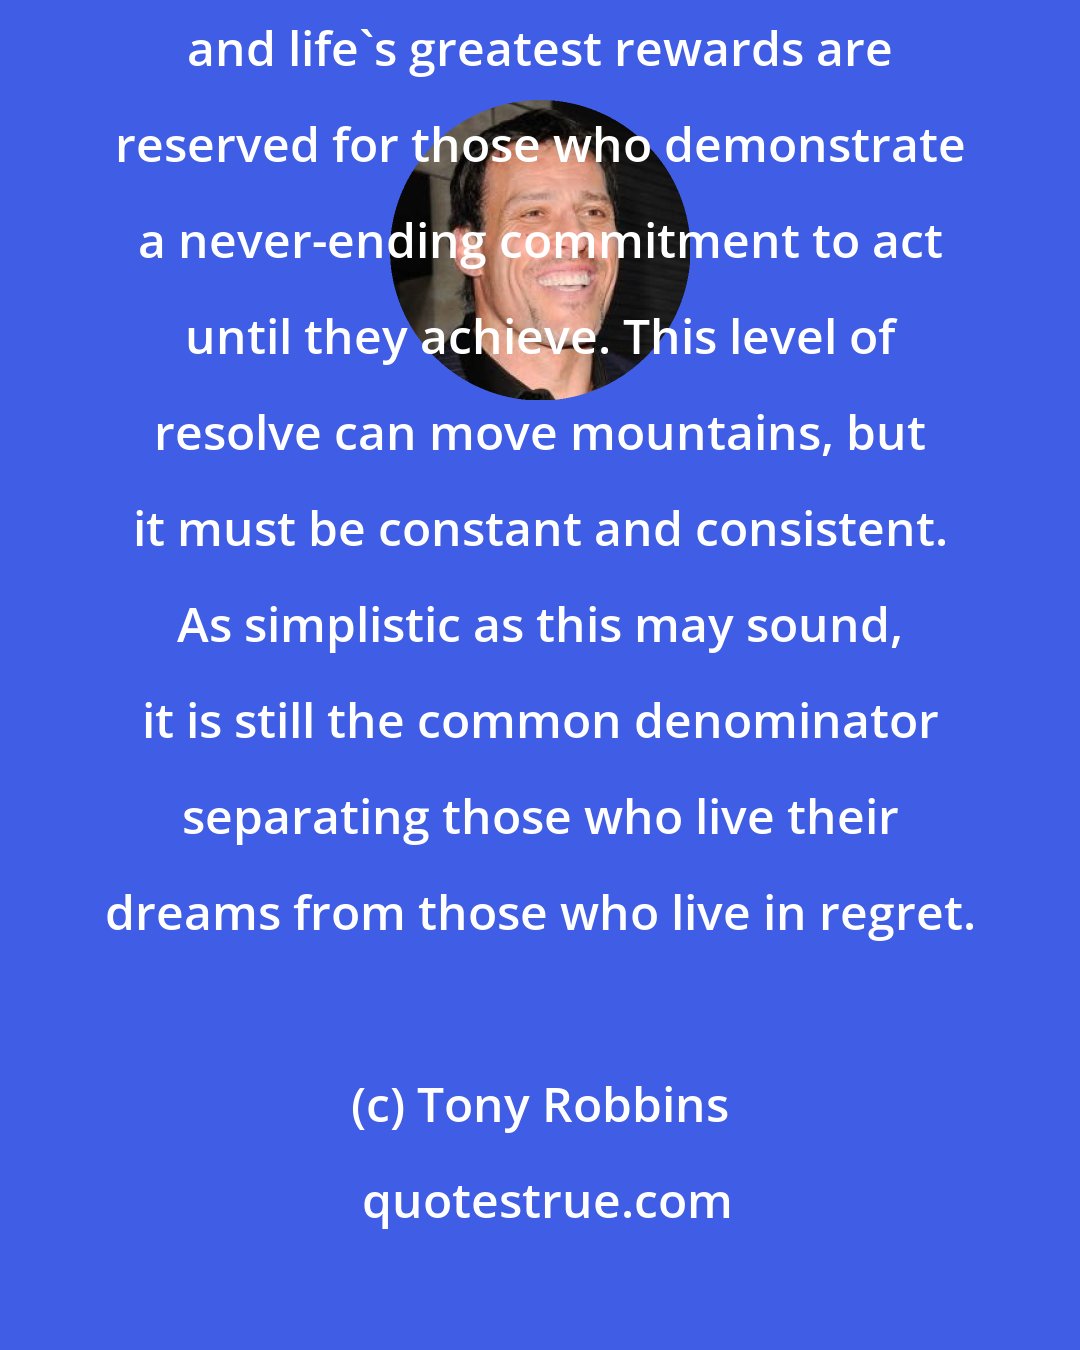 Tony Robbins: I believe life is constantly testing us for our level of commitment, and life's greatest rewards are reserved for those who demonstrate a never-ending commitment to act until they achieve. This level of resolve can move mountains, but it must be constant and consistent. As simplistic as this may sound, it is still the common denominator separating those who live their dreams from those who live in regret.